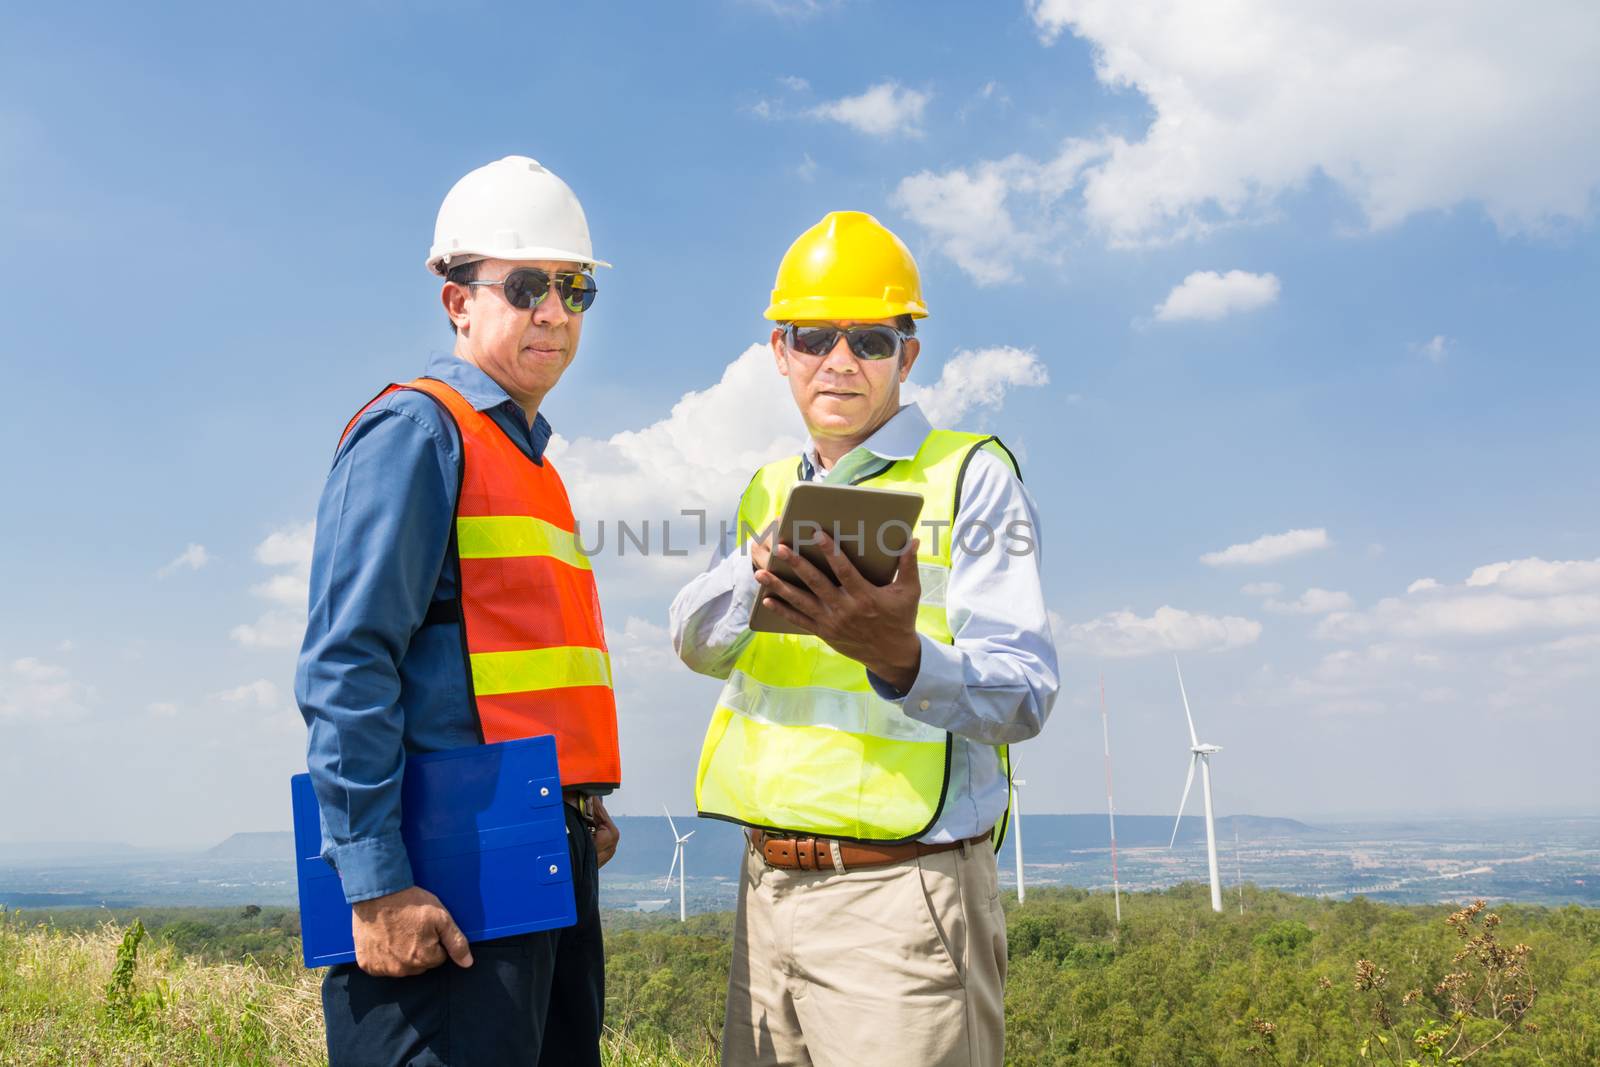 Alternative Power or Renewable Energy Technology Project Development Concept, Engineer and Architect discuss over Digital Wireless Tablet and Clipboard while working at Wind Turbine Power Generator Tower site.